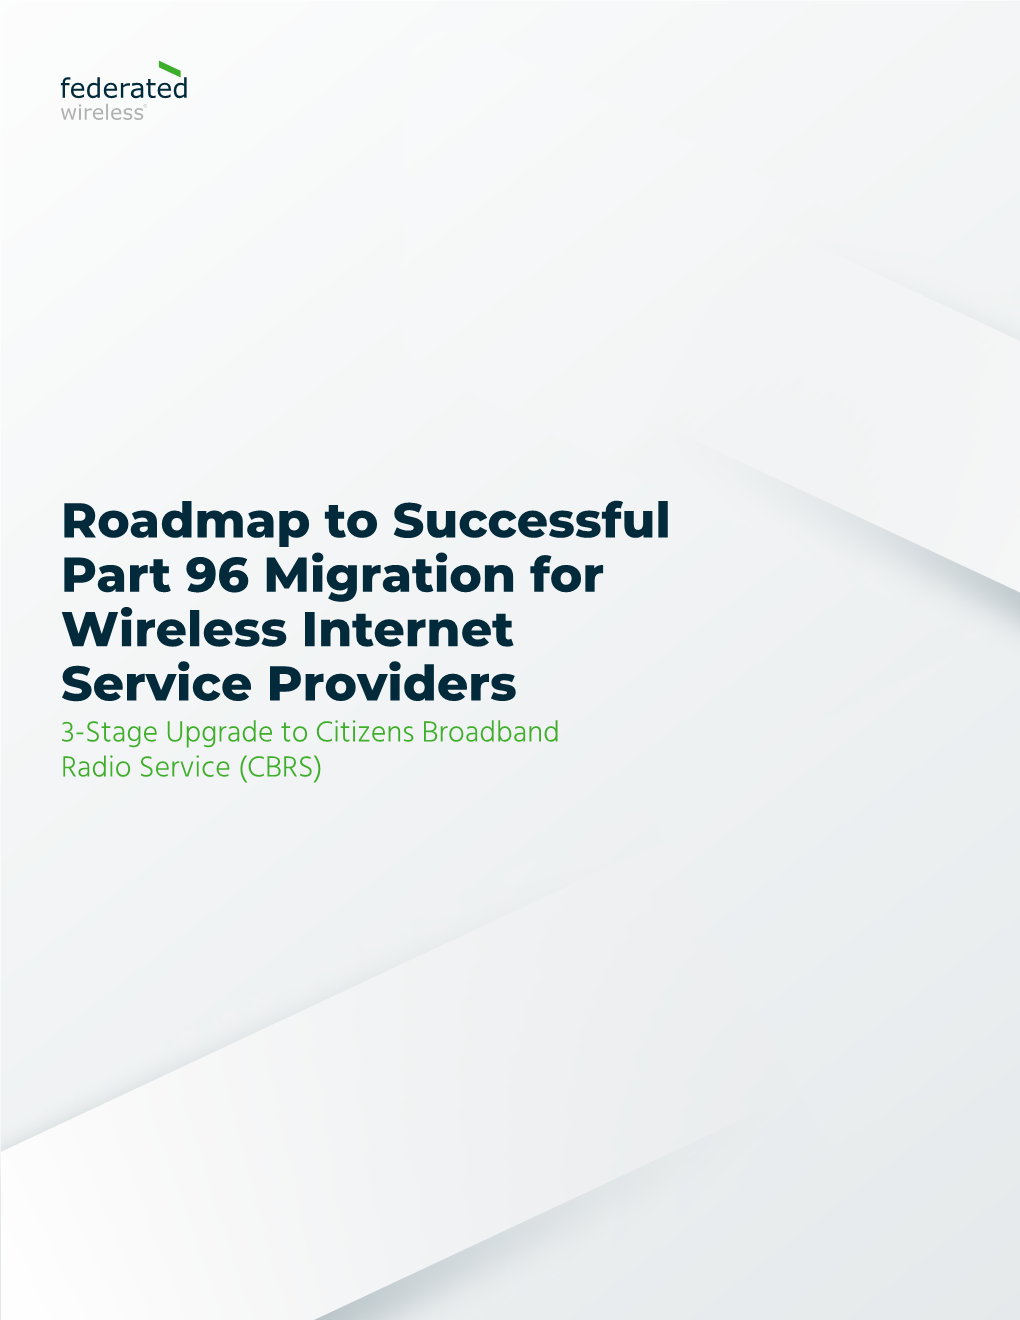 Roadmap to Successful Part 96 Migration for Wireless Internet